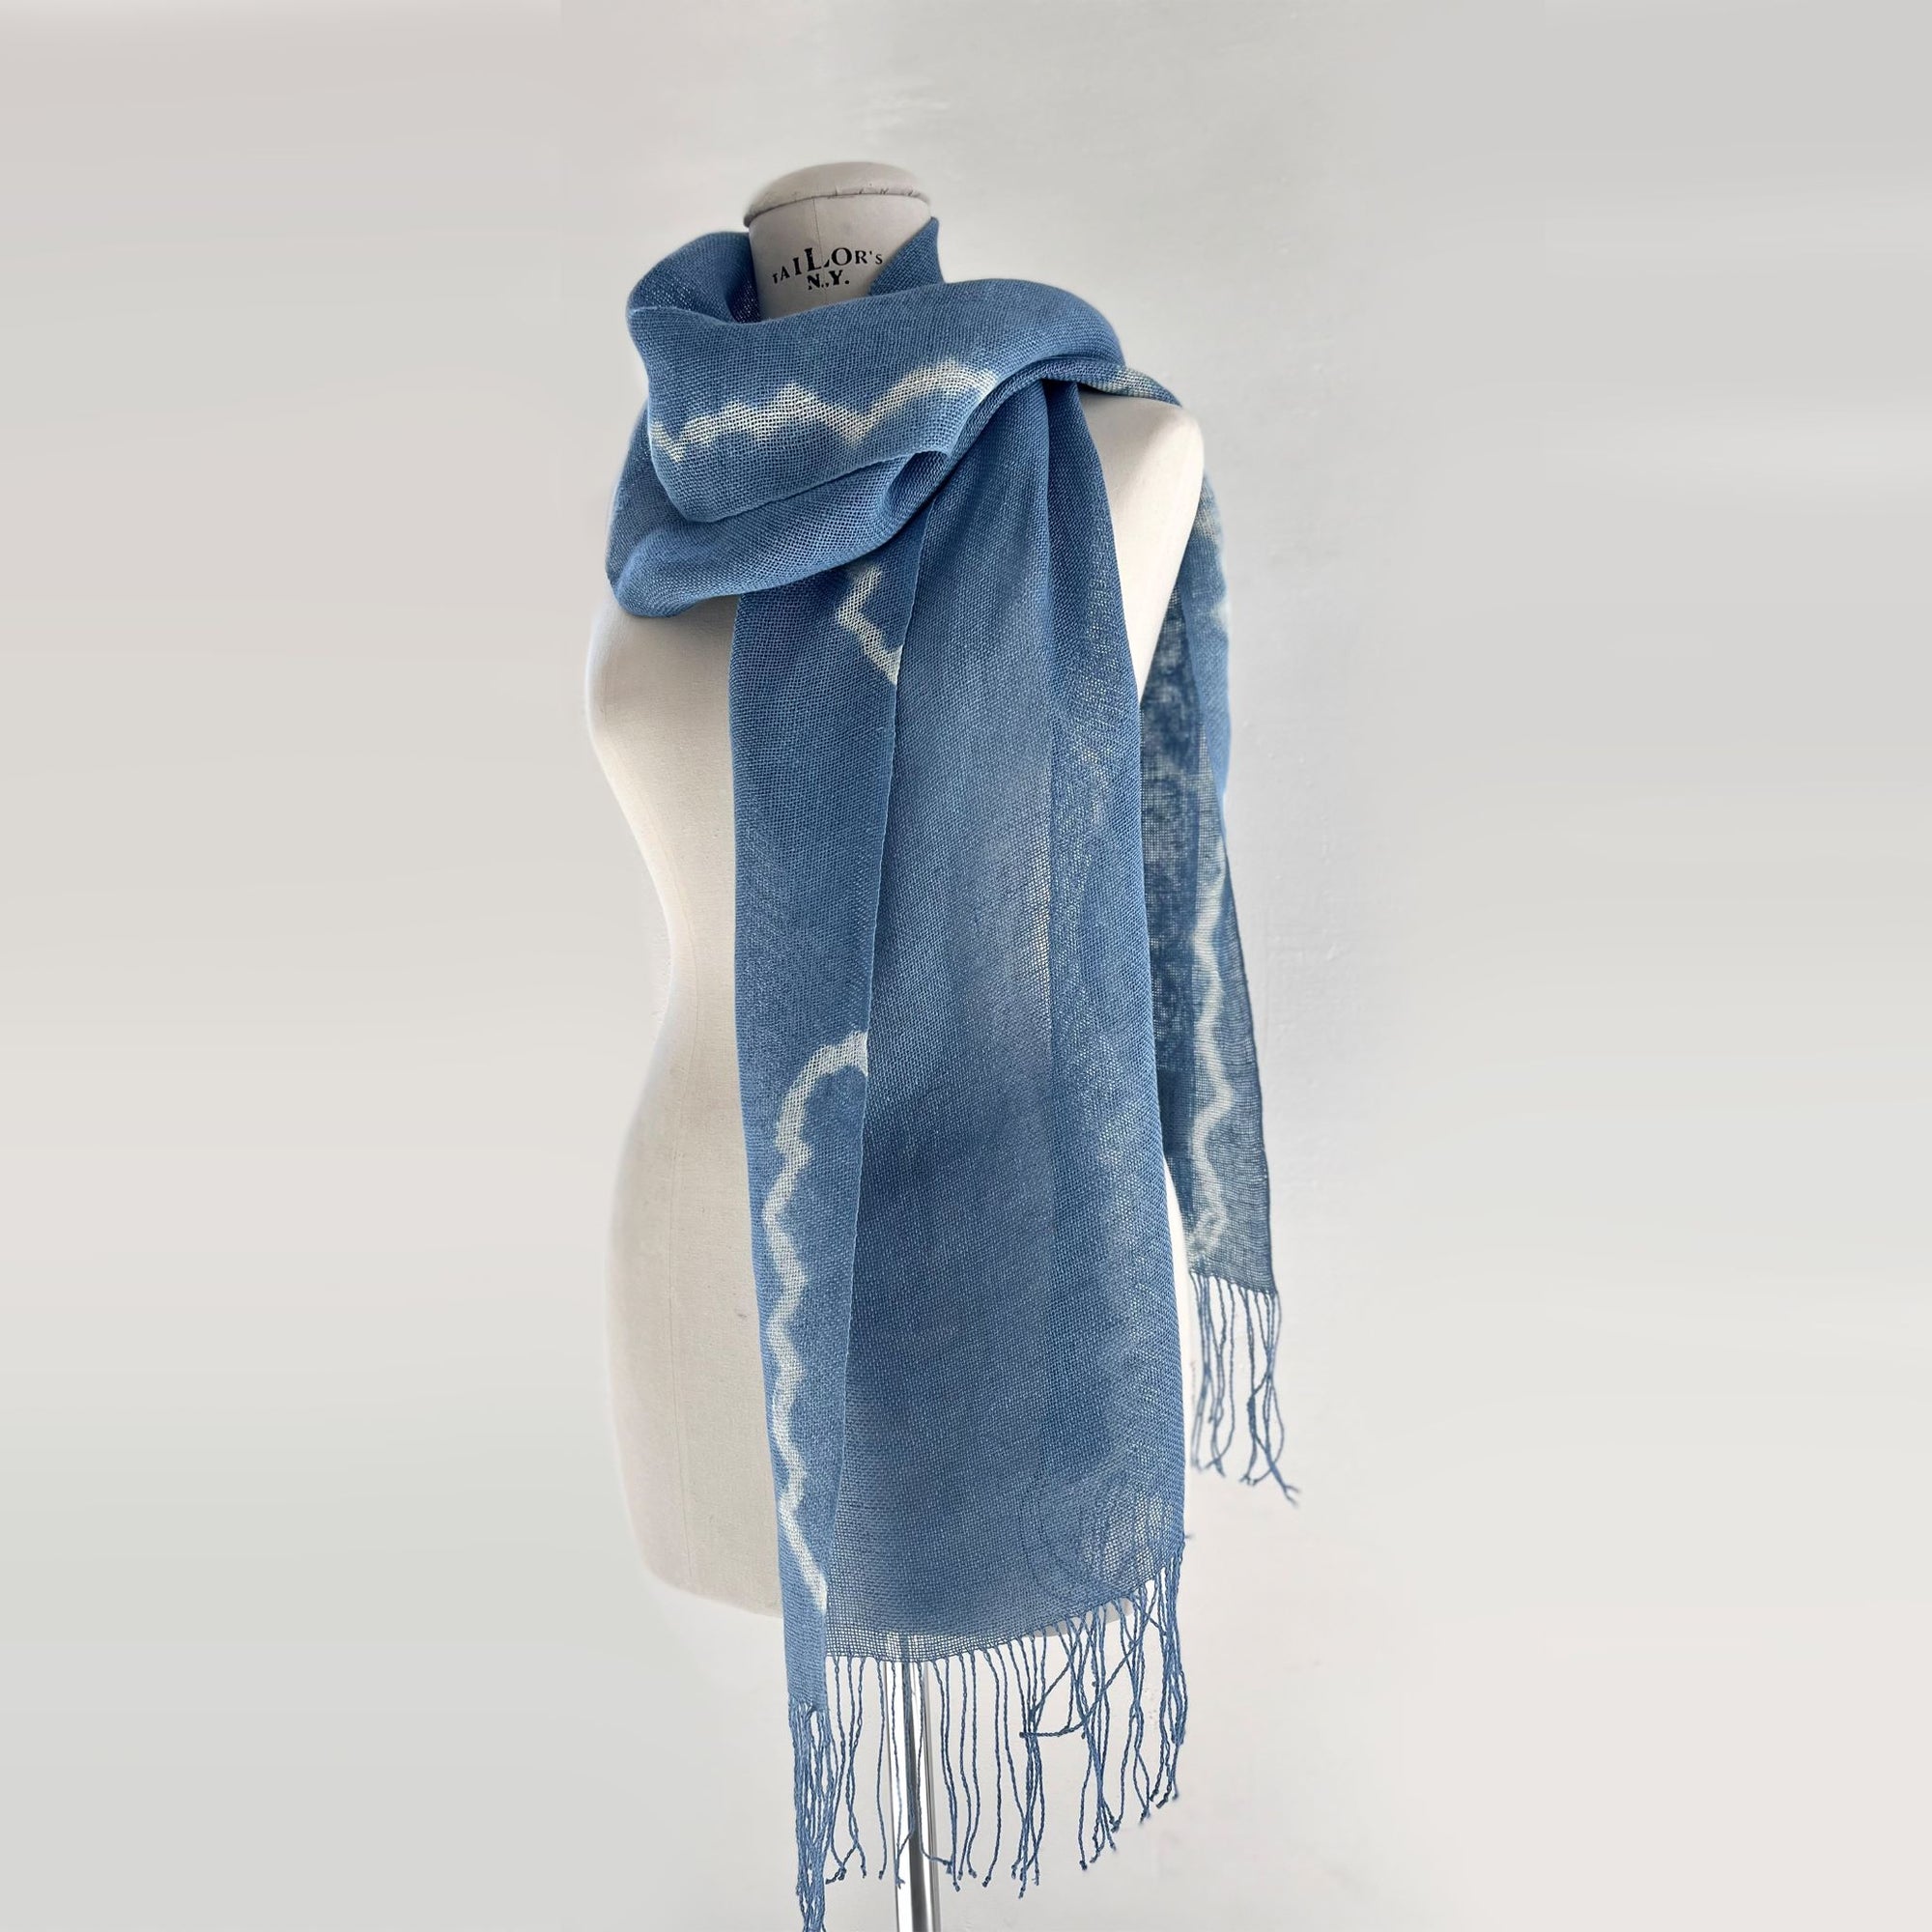 Linen scarf "Waves No 2" in blue 40x200 cm